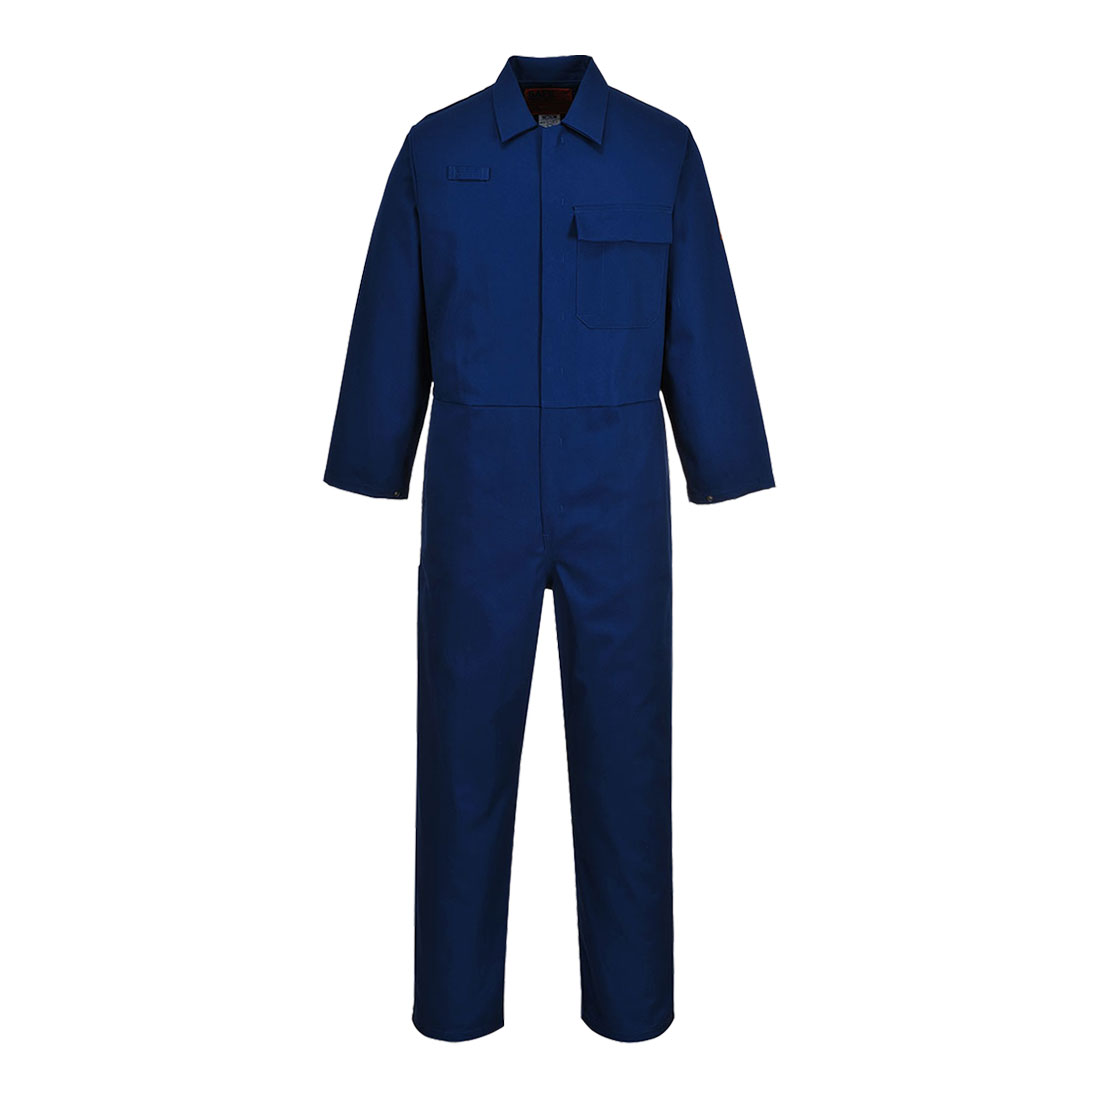 CE Safe-Welder Coverall